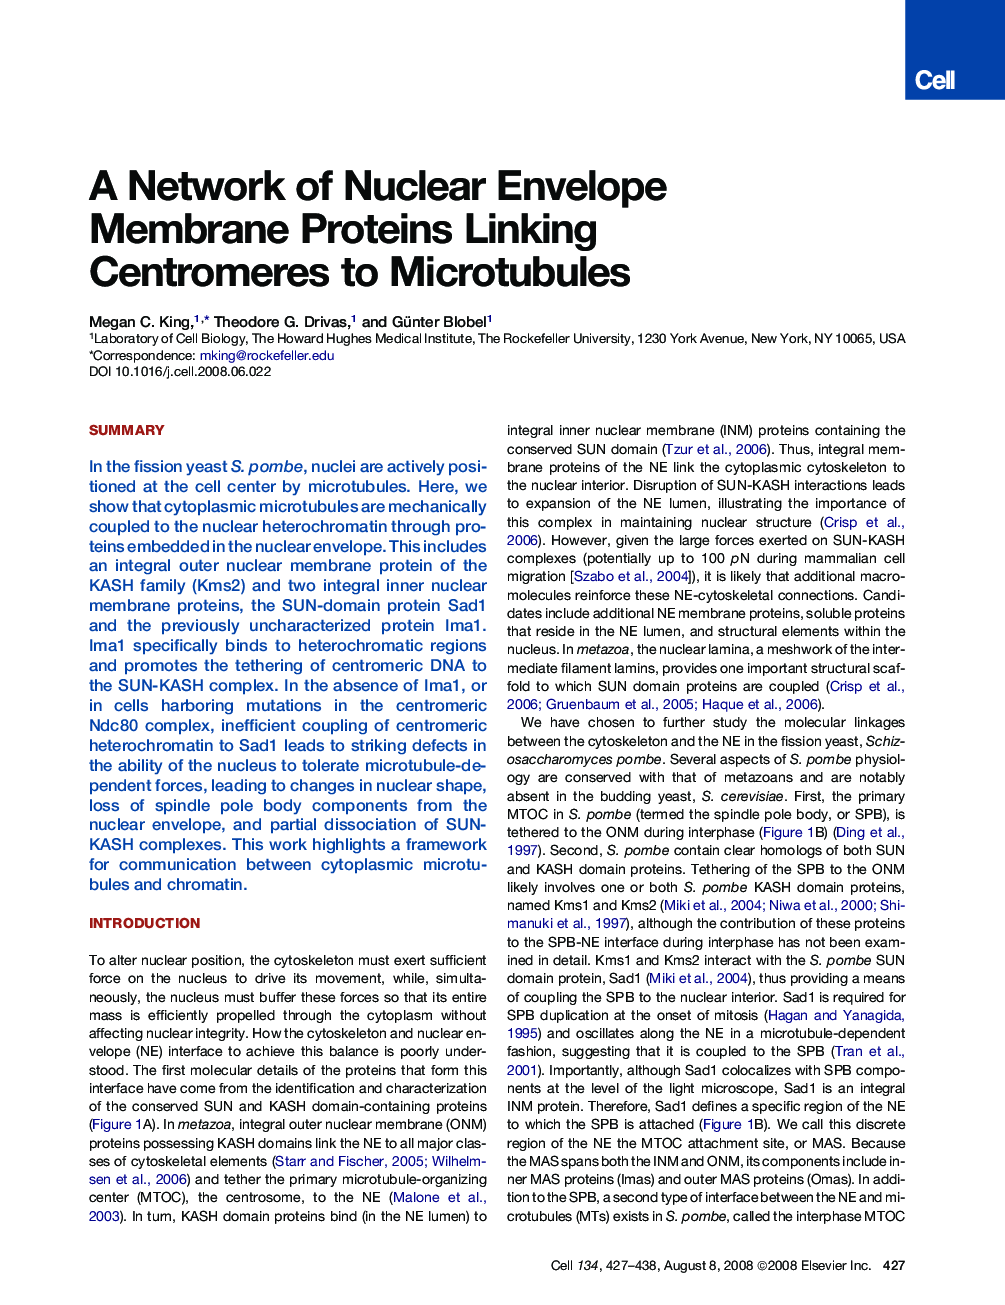 A Network of Nuclear Envelope Membrane Proteins Linking Centromeres to Microtubules